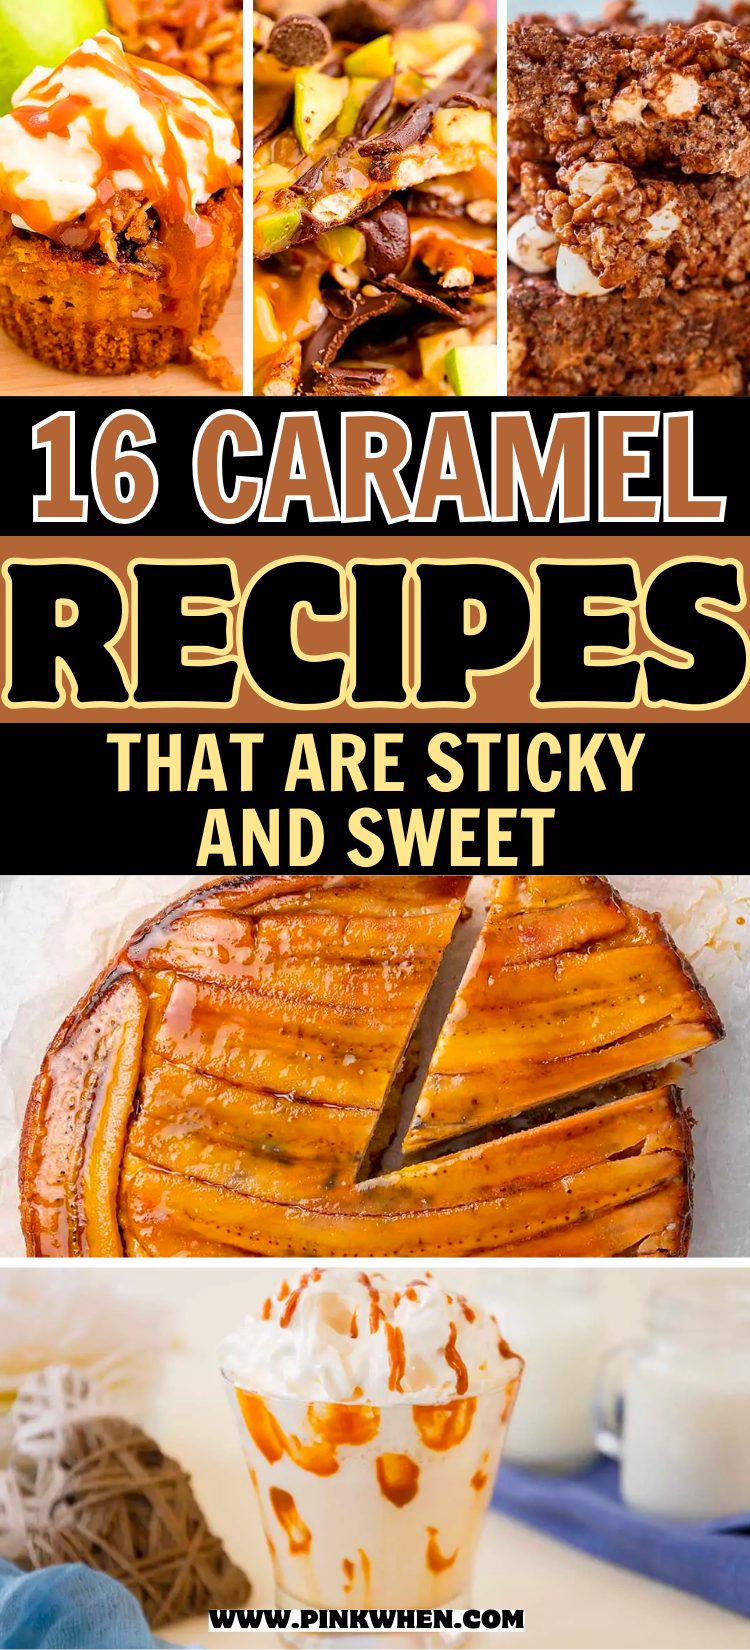 16 Caramel Recipes That Are Sticky and Sweet